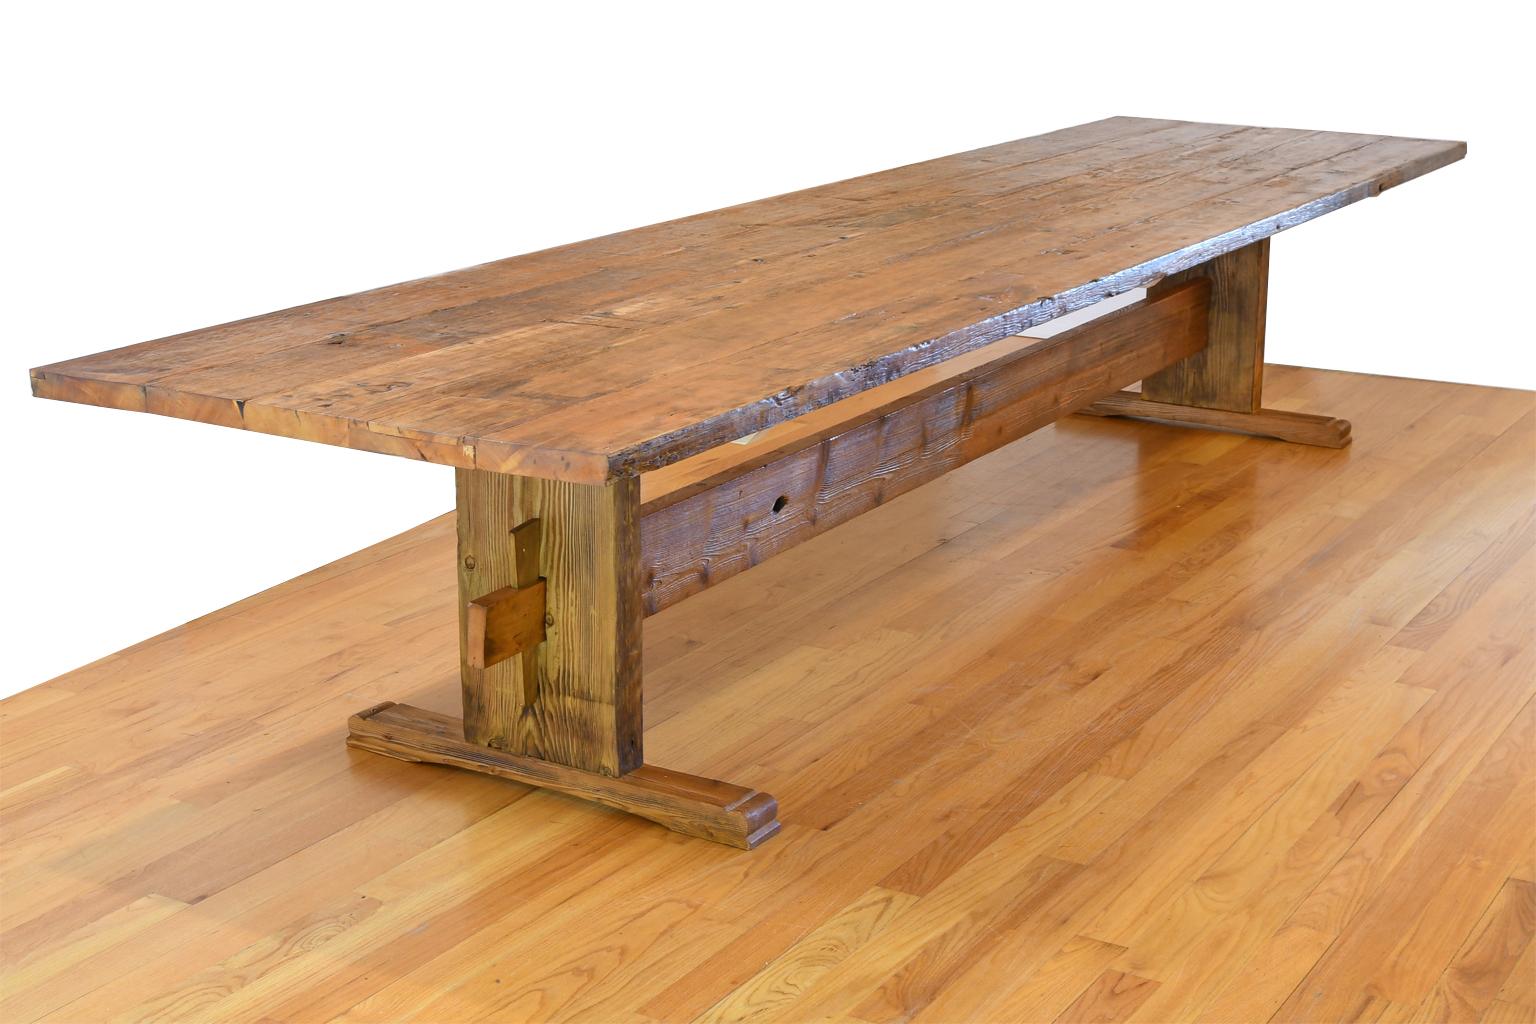 Inspired by an antique Swedish table from the early 1800's once in our inventory, this beautiful 14-foot-long custom dining table is made from repurposed antique pine wood. The distressed top and base have been finished with tung oil varnish for a